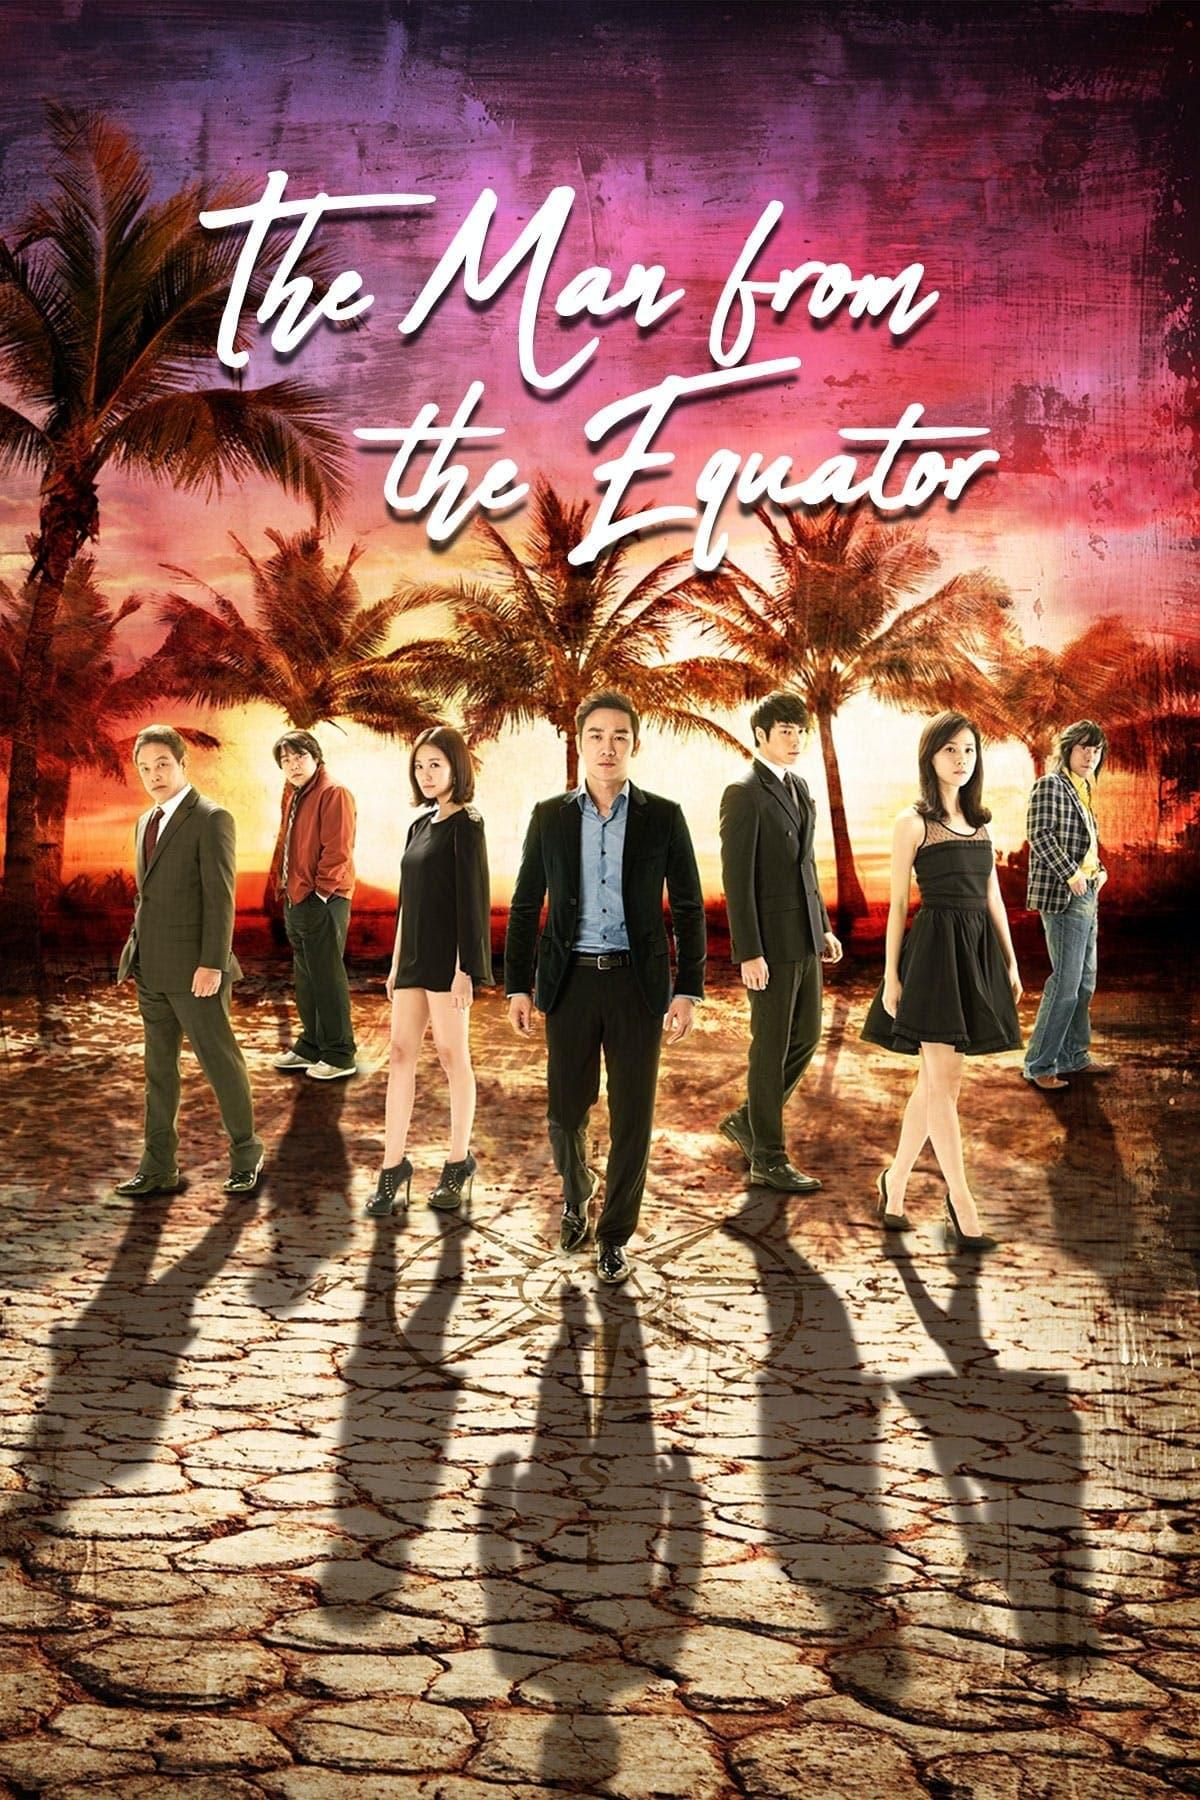 The Man from the Equator poster